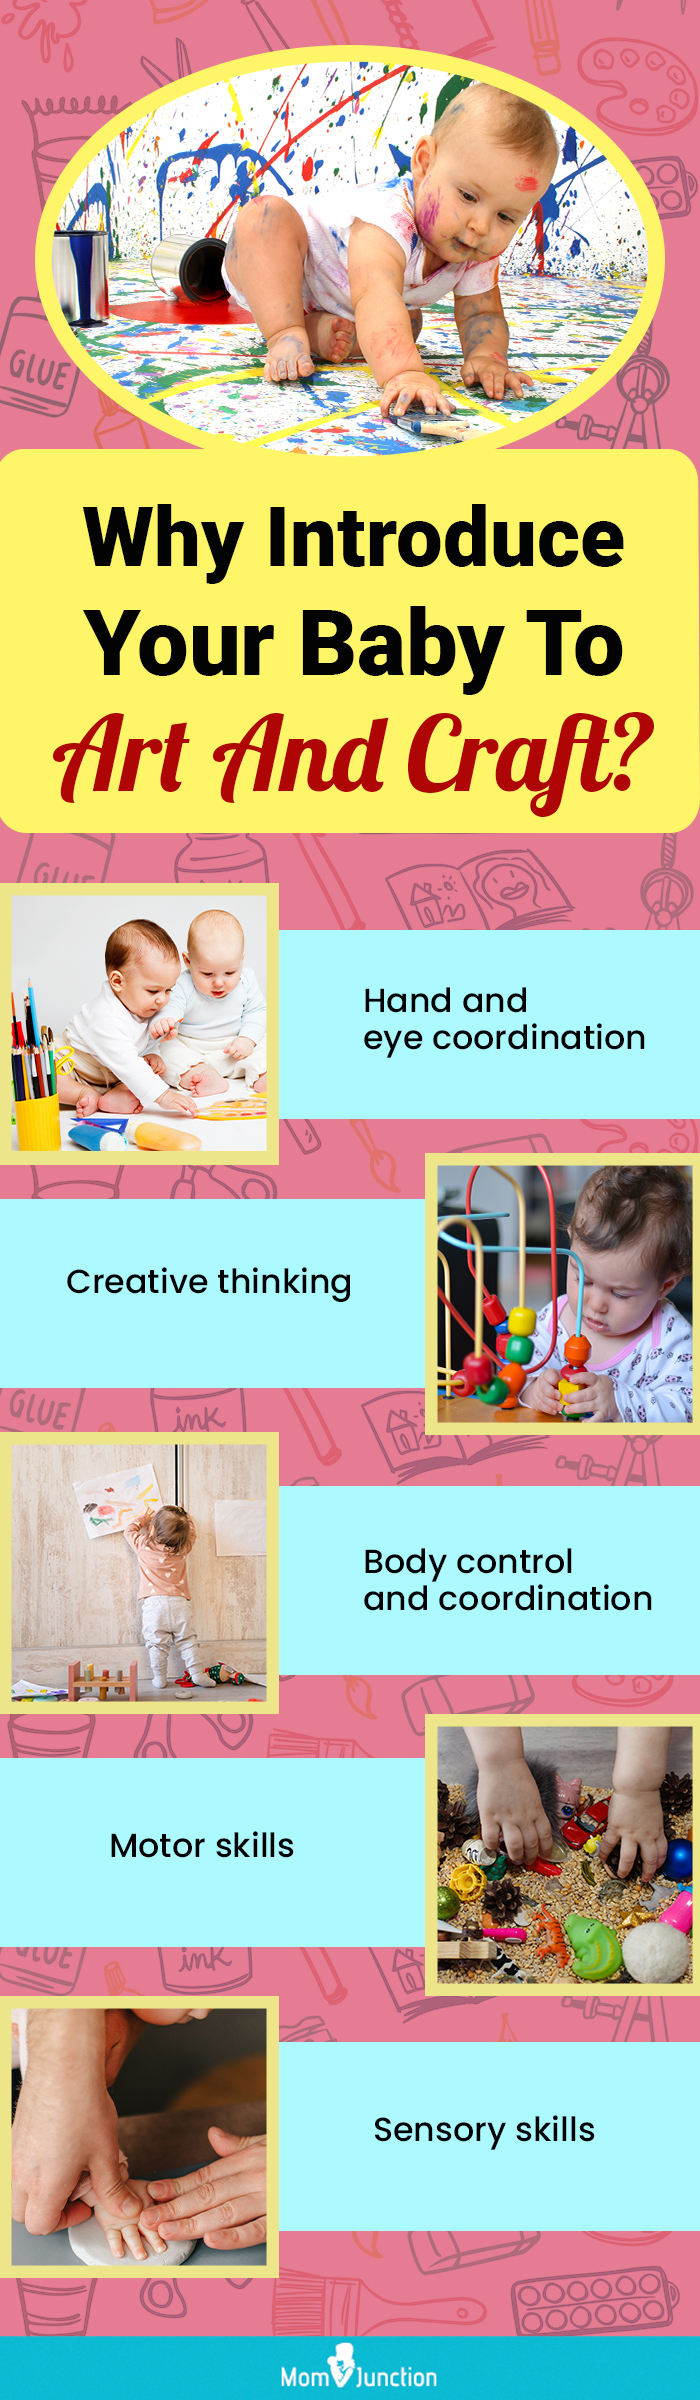 benefits of art and craft for babies (infographic)